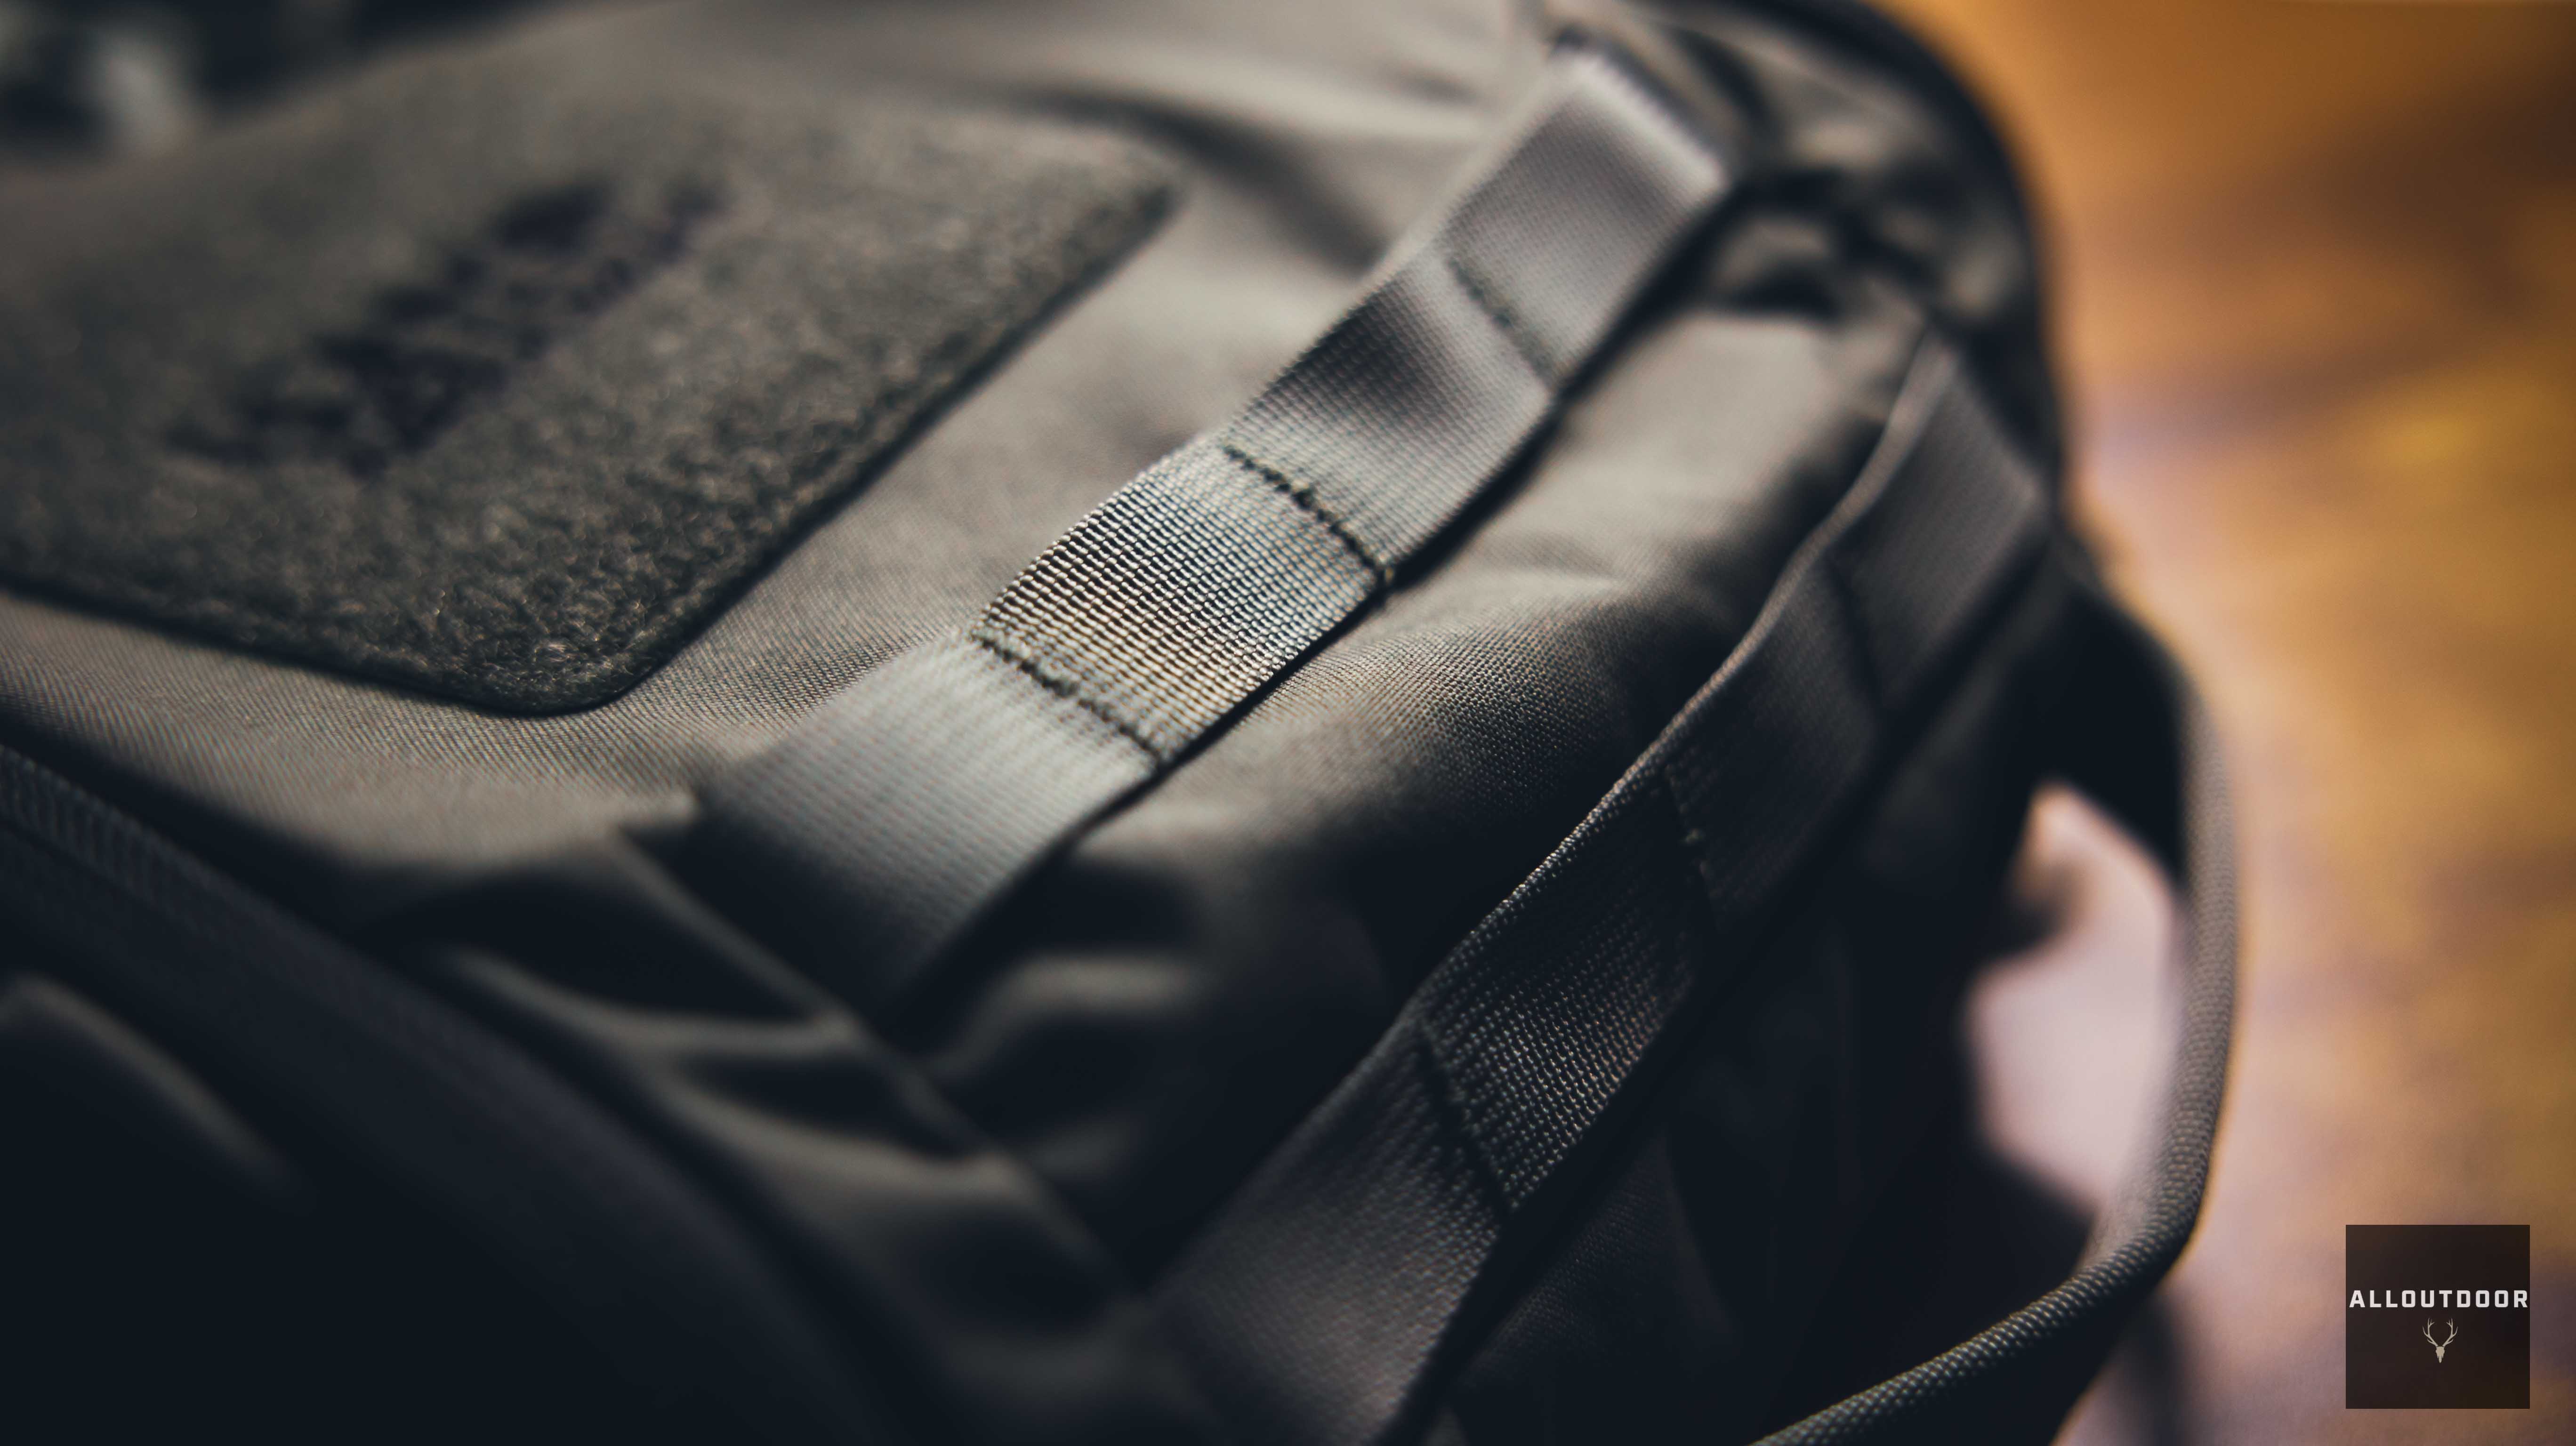 AllOutdoor Review - Mystery Ranch Rip Ruck 15 EDC Backpack